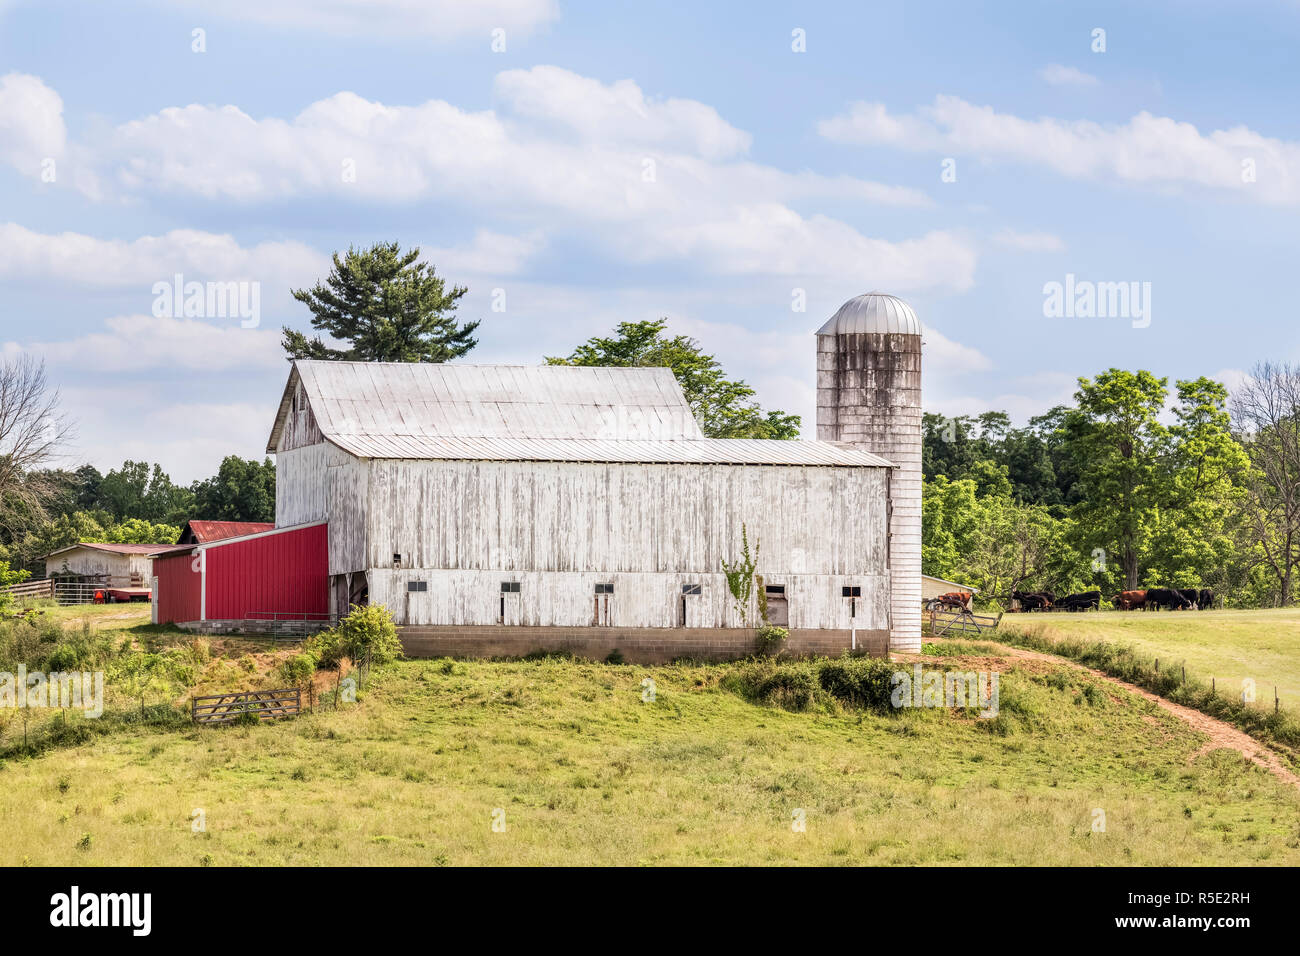 A large white cattle barn with silo stands on a hilly Ohio farm under a cloudy blue sky. Stock Photo